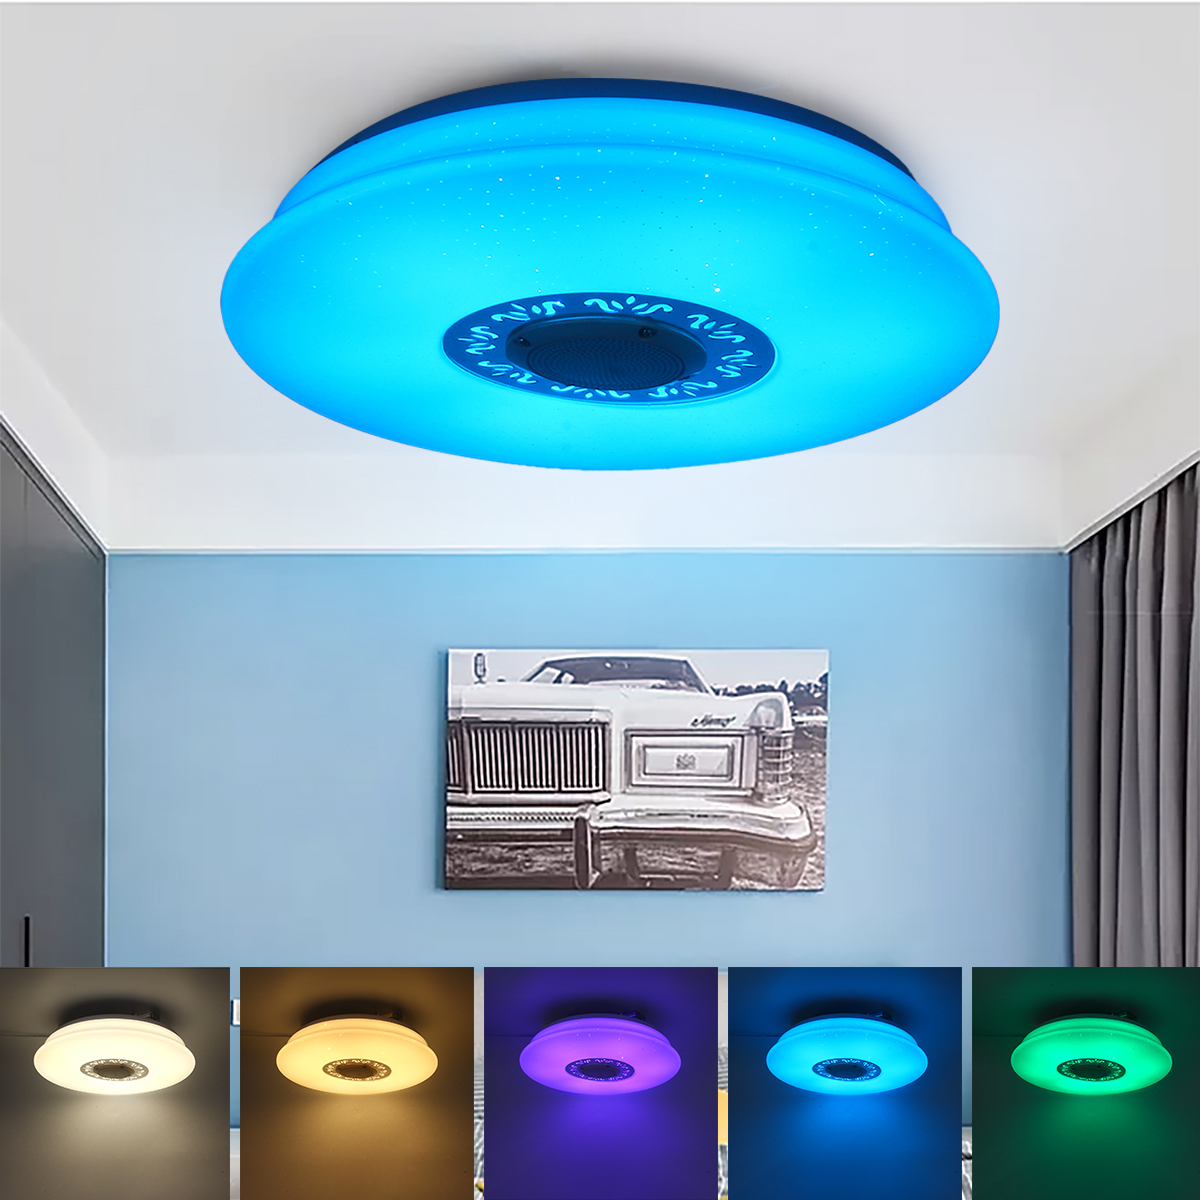 3640cm-120W-Music-Ceiling-Light-with-Bluetooth-Speaker-Smart-APP-and-Remote-Control-1722313-2